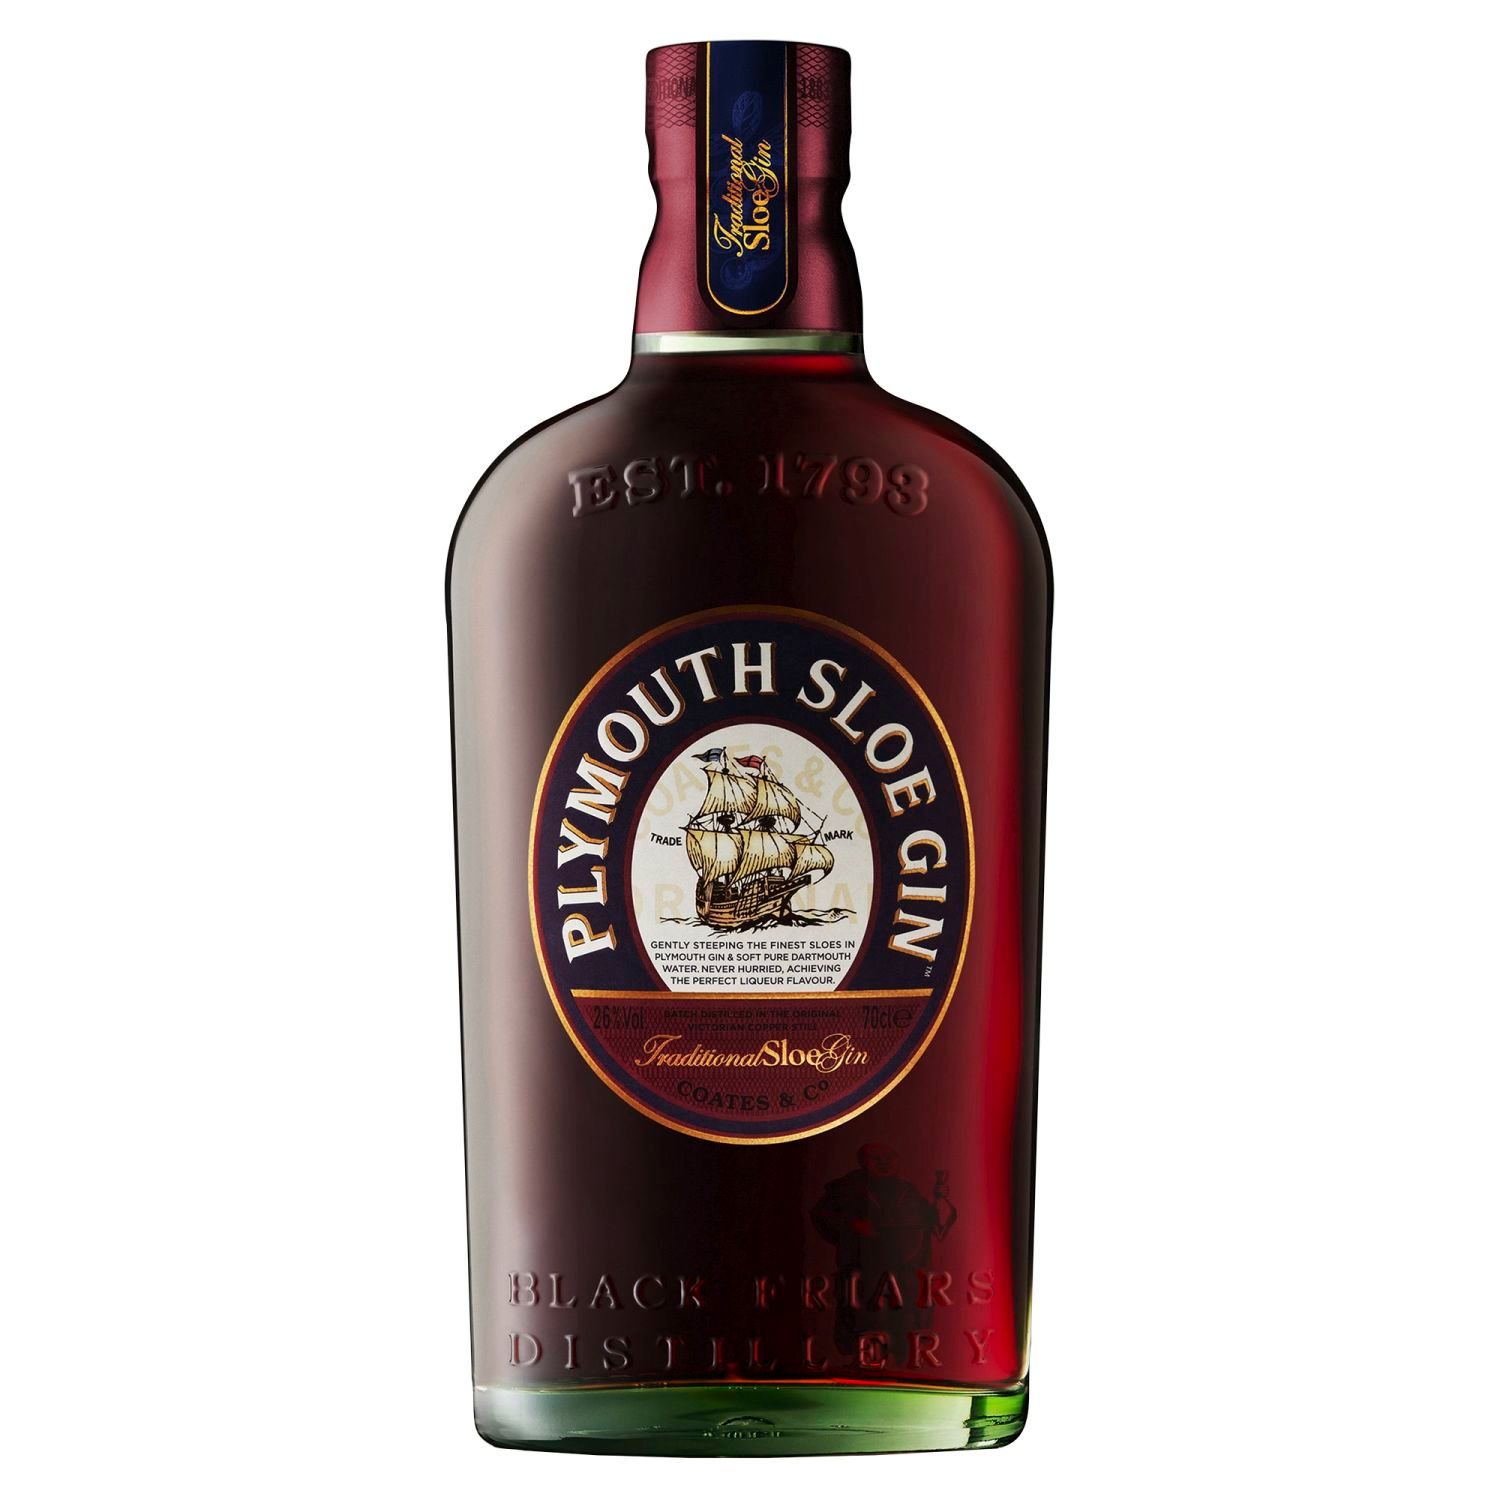 Plymouth Traditional Sloe Gin 700mL Bottle